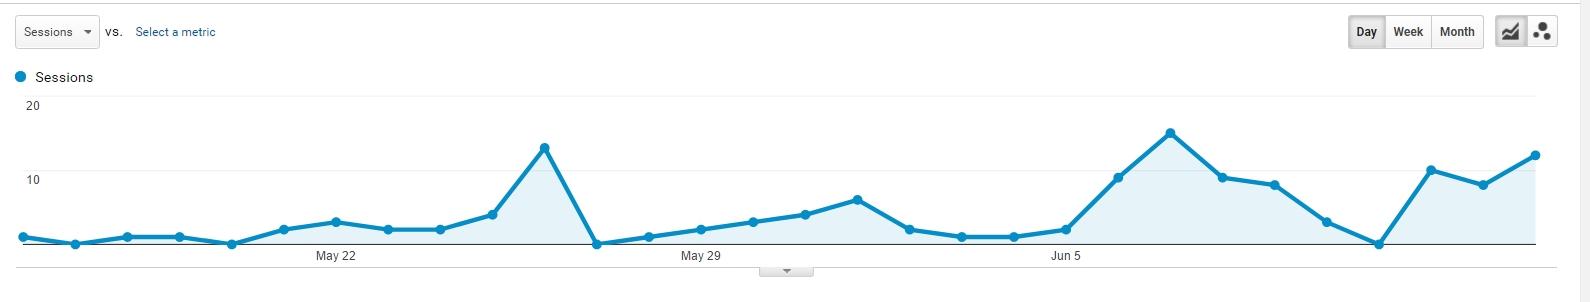 Stripo.email search traffic up to 10 people per day, May 2017